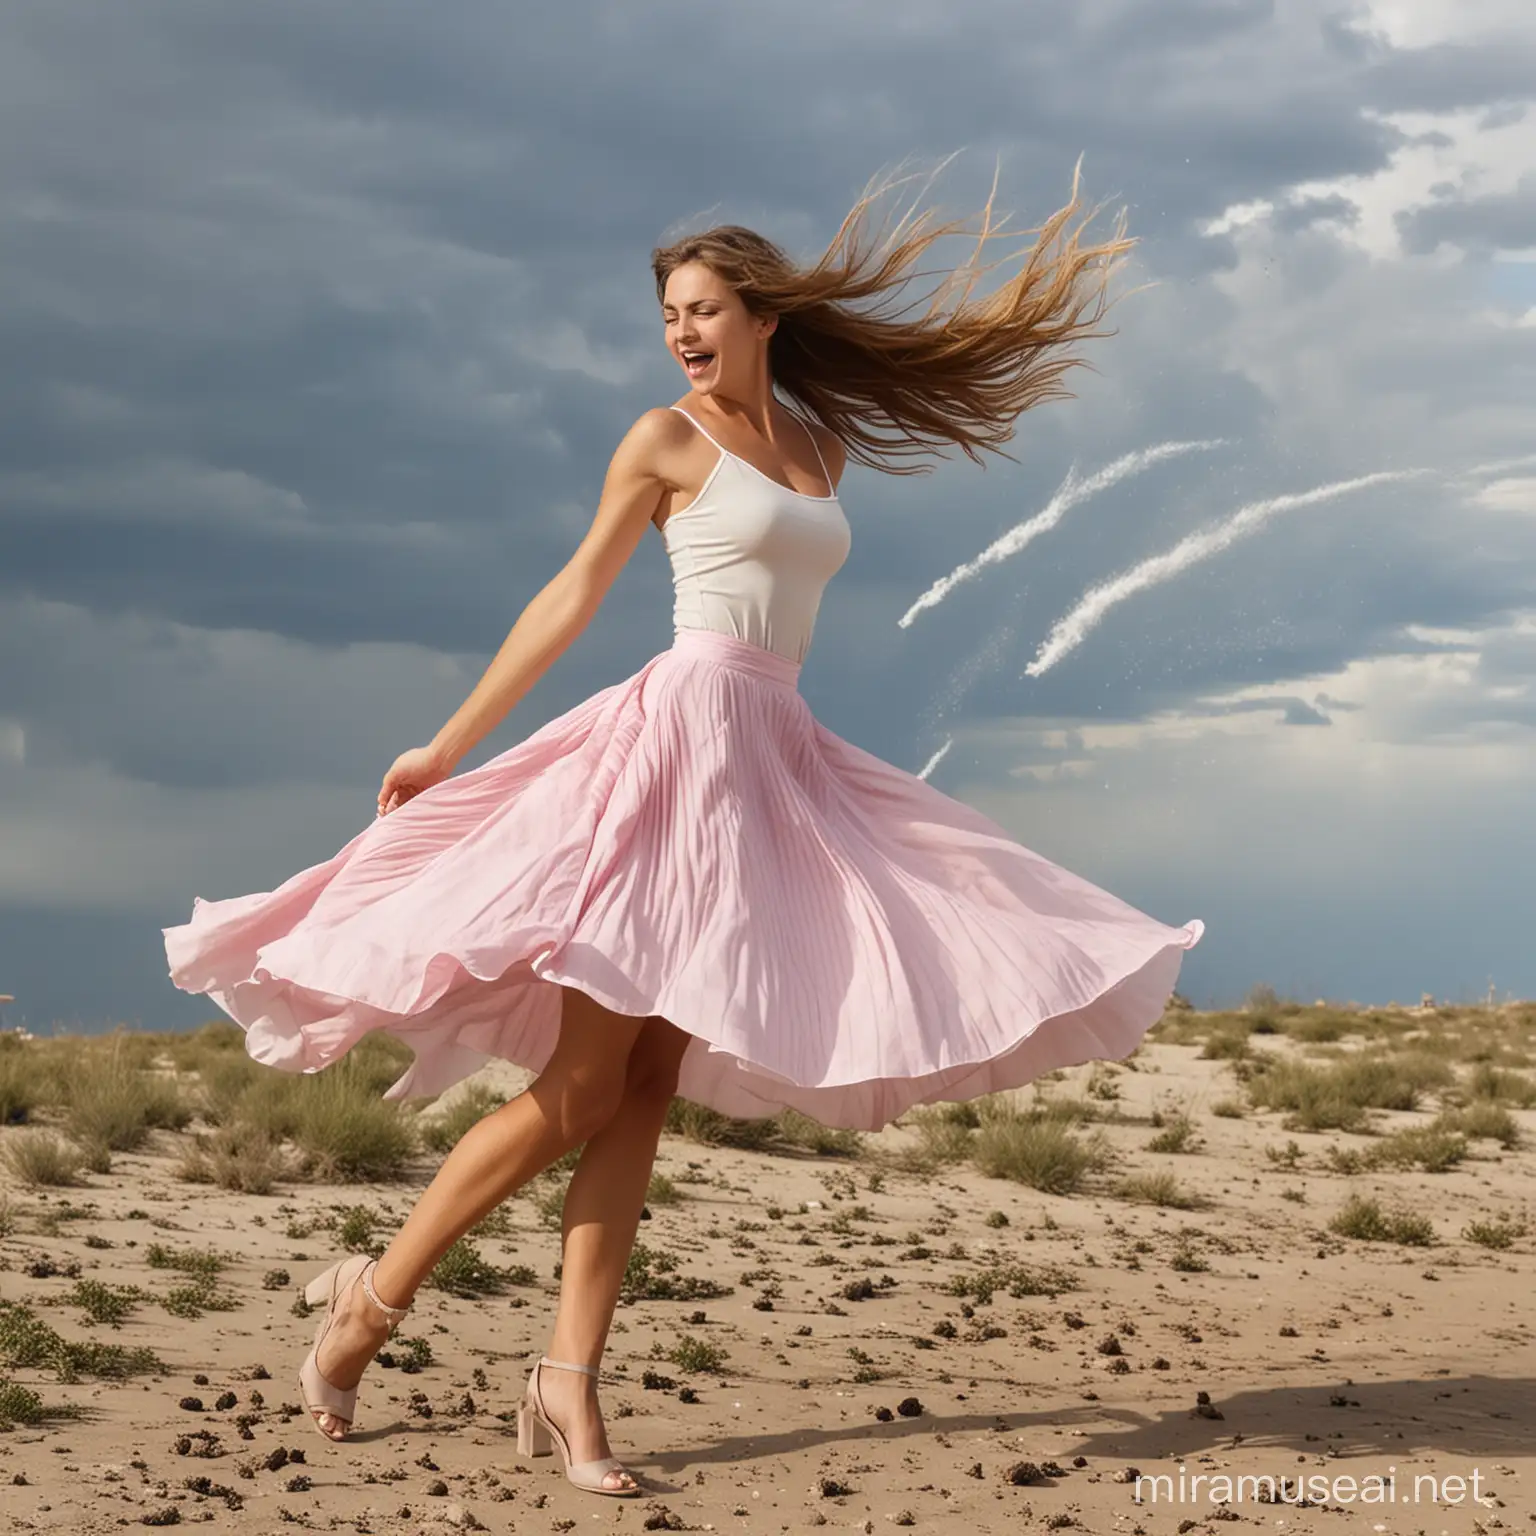 heavy wind and skirt blows up of beautiful girl wearing skirt